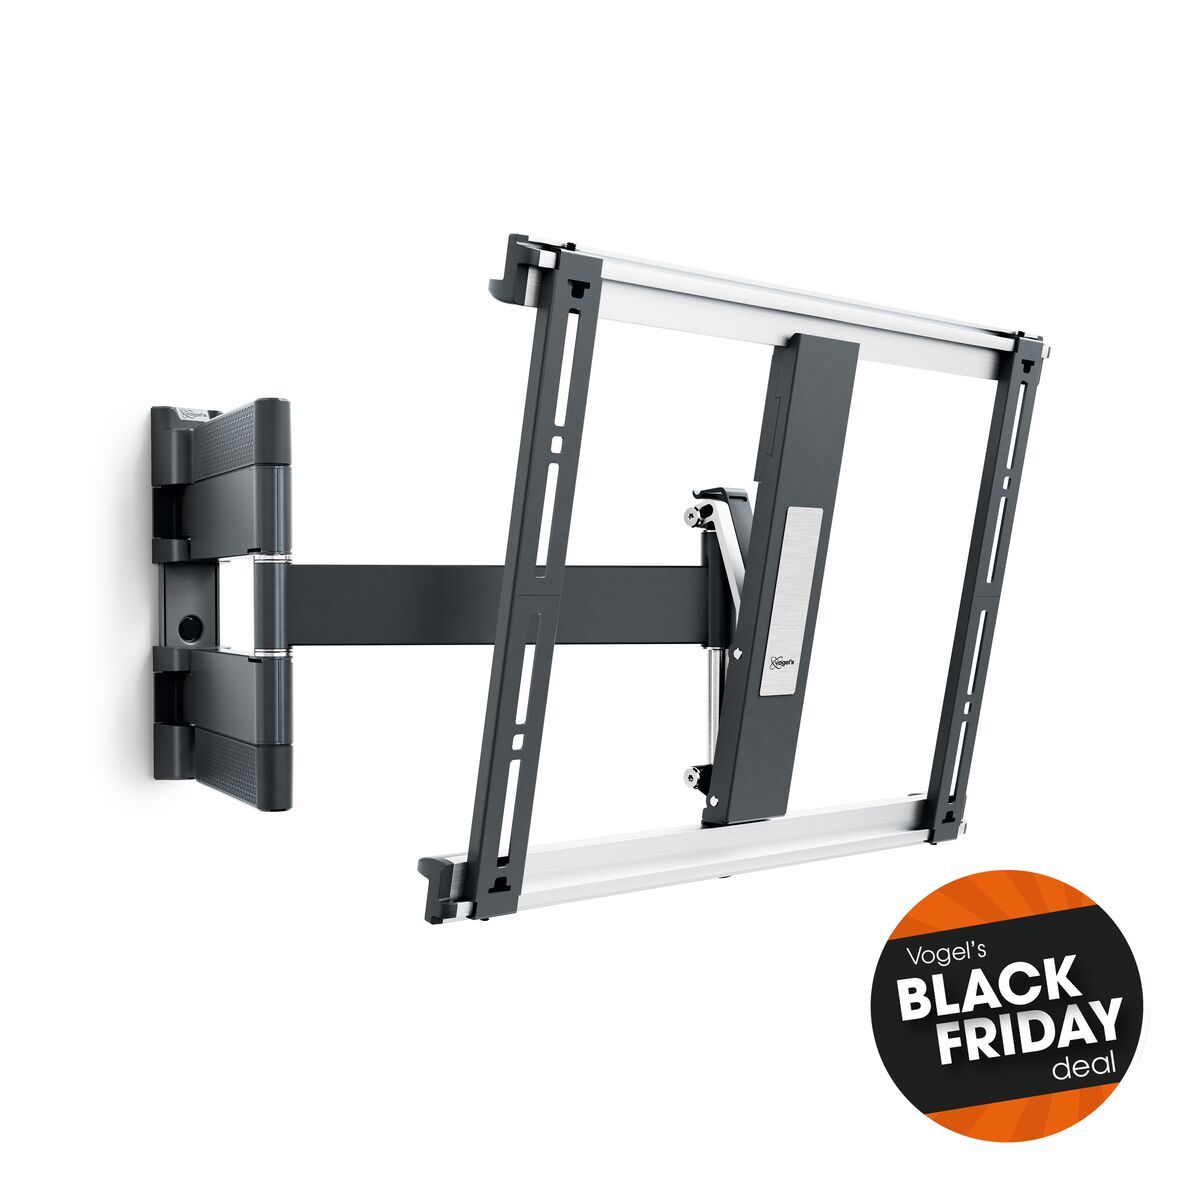 Vogel's THIN 445 ExtraThin Full-Motion TV Wall Mount (black) - Suitable for 26 up to 55 inch TVs - Full motion (up to 180°) - Tilt up to 20° - Promo